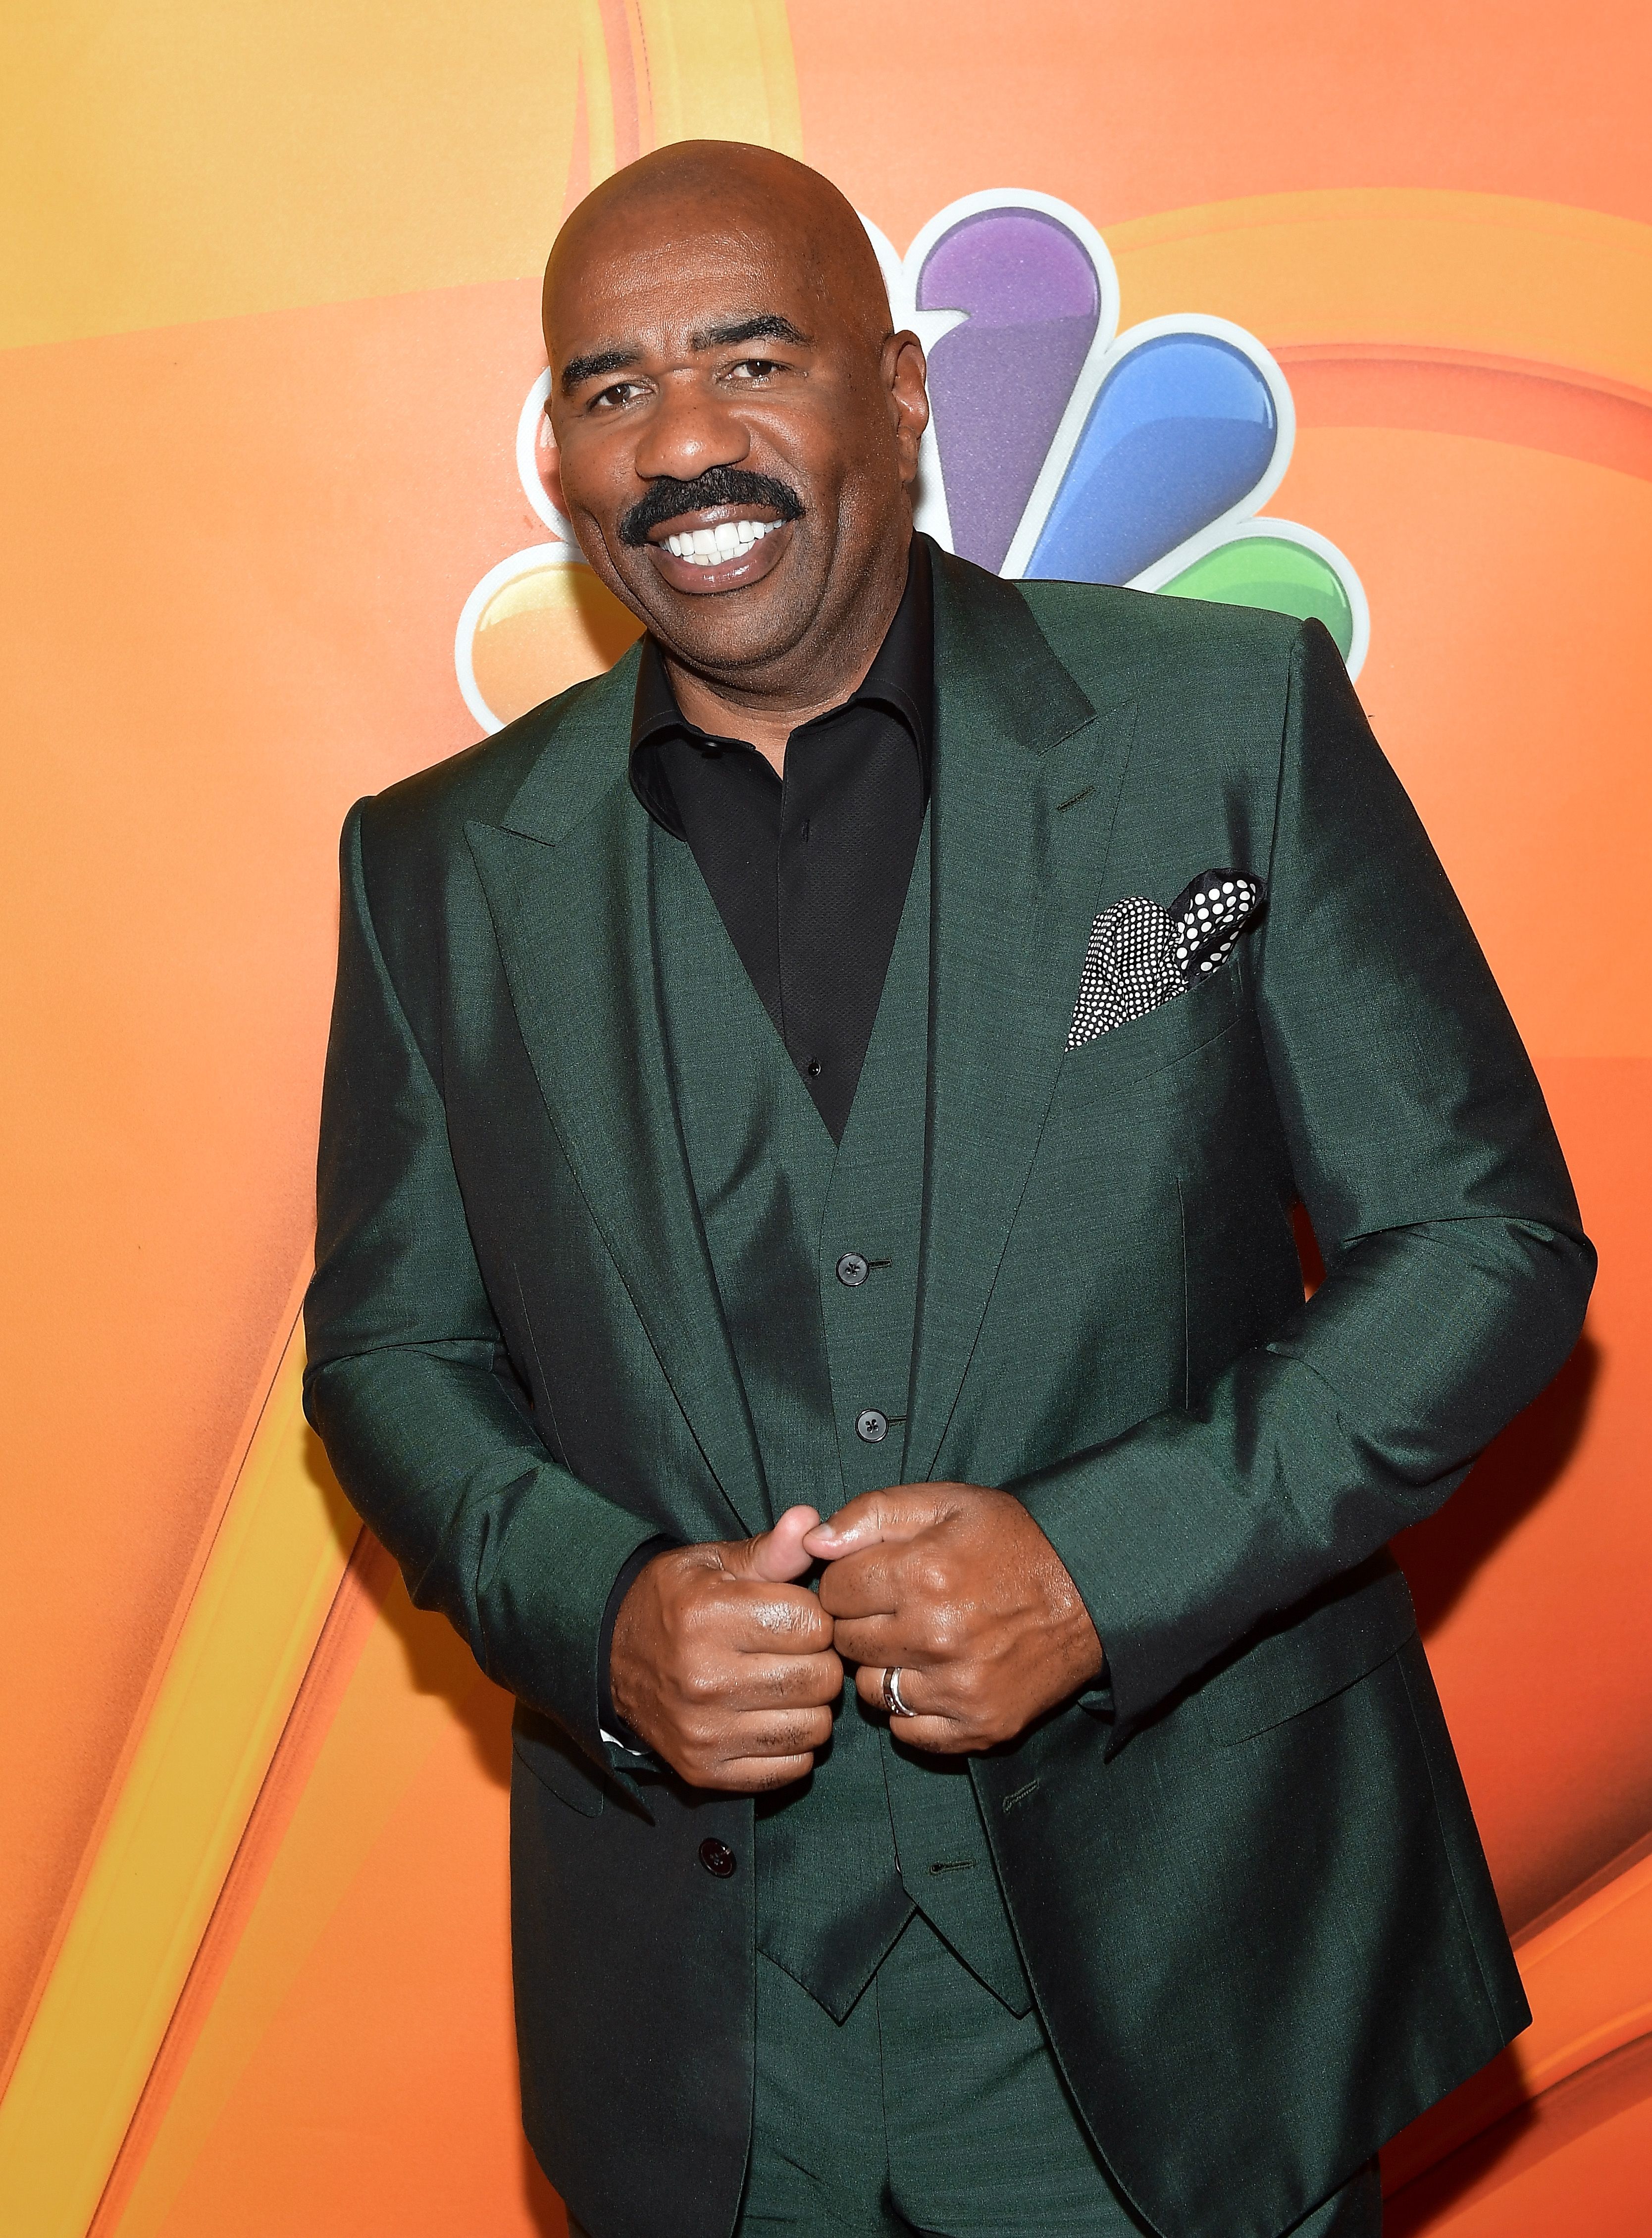 Steve Harvey at the NBCUniversal Summer TCA Press Tour in August 2017. | Photo: Getty Images